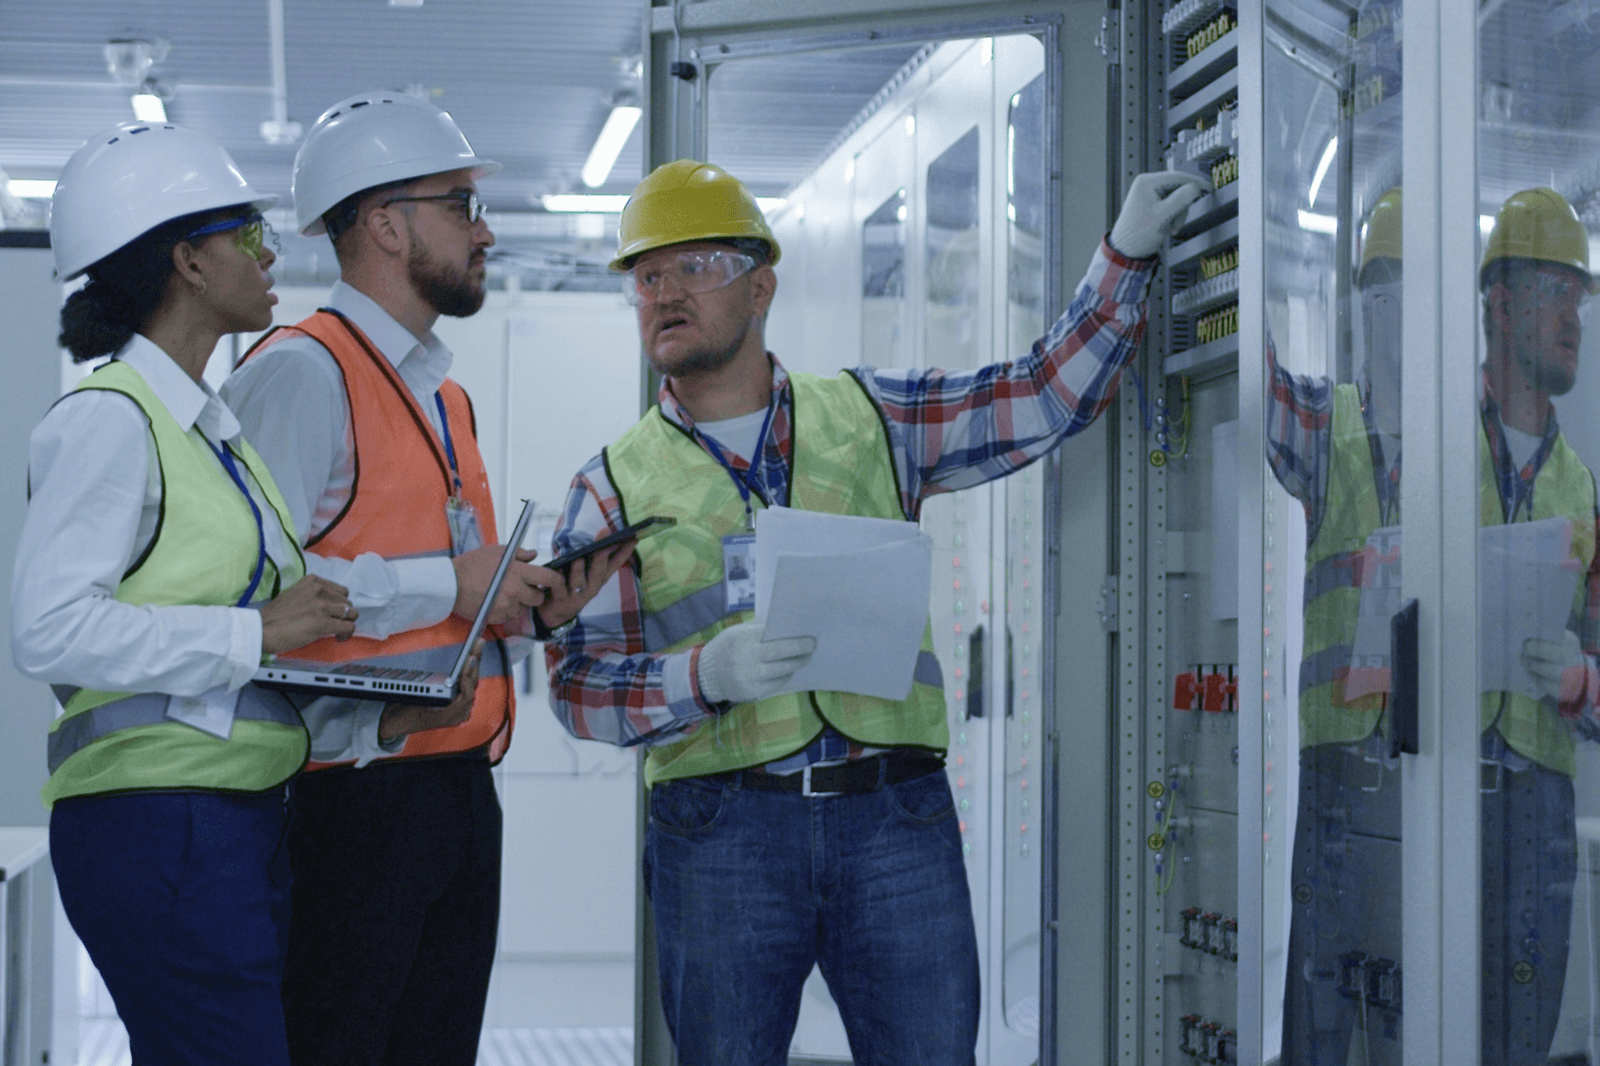 Three people in hard hats looking at electrical panel